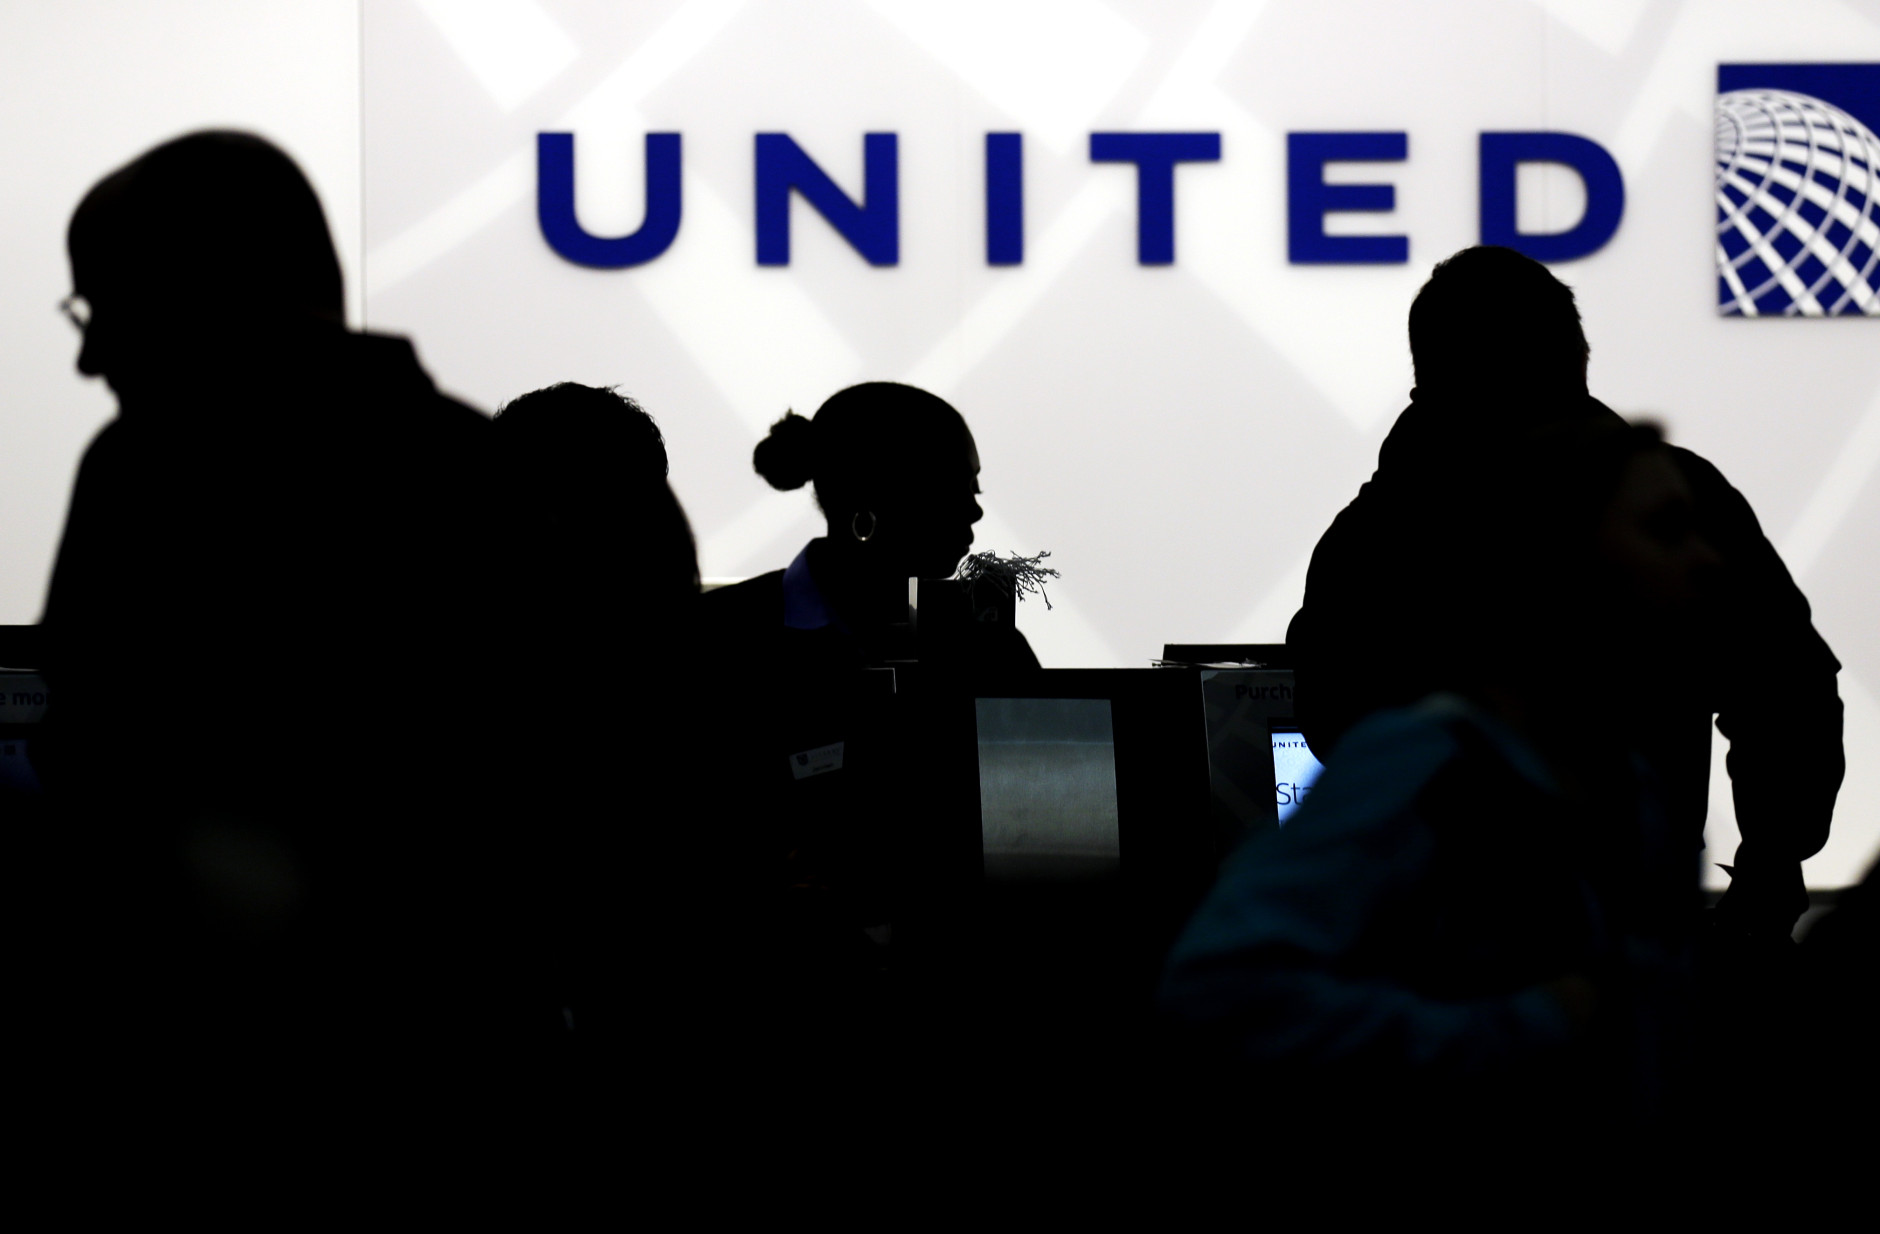 FILE - In this Saturday, Dec. 21, 2013, file photo, travelers check in at the United Airlines ticket counter at Terminal 1 in O'Hare International Airport in Chicago. Starting March 2015, elite members of Uniteds MileagePlus will earn between 7 and 11 miles for every dollar they spend on tickets, not counting taxes. Regular members, those who fly less than 25,000 miles and spend less than $2,500 a year, will get 5 miles per dollar toward free travel. (AP Photo/Nam Y. Huh, File)